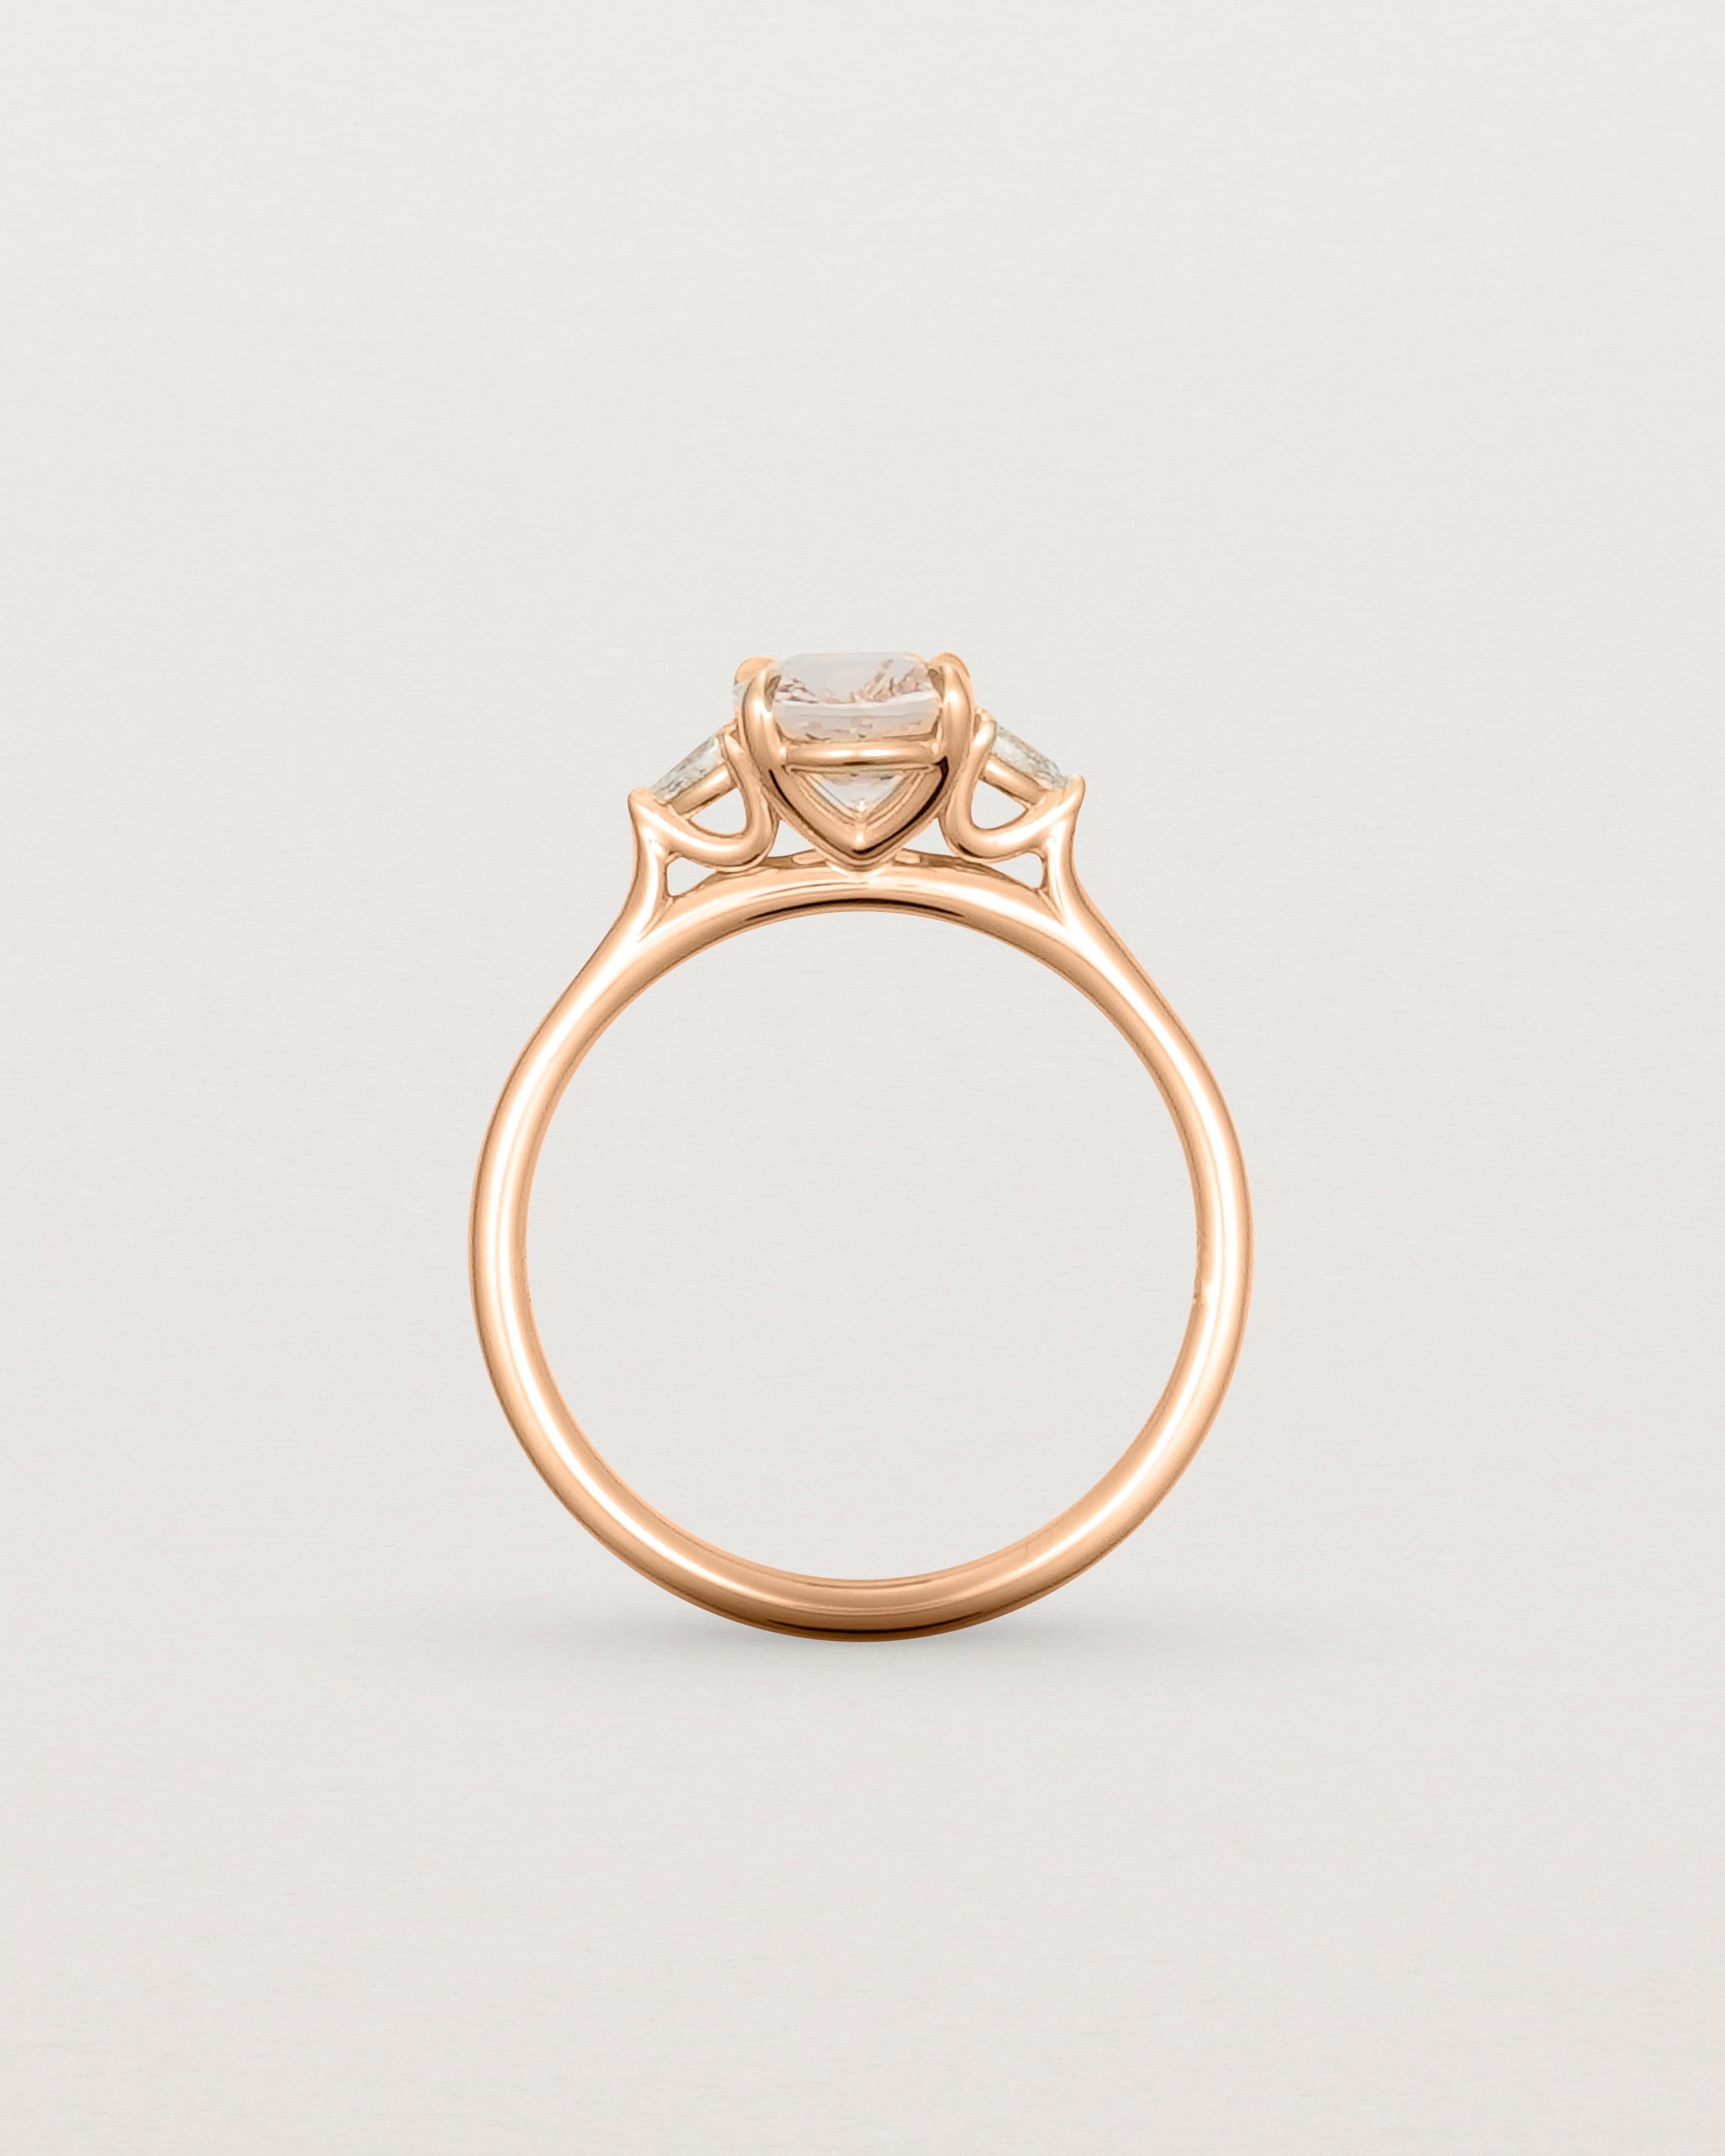 Side profile of an oval morganite adorned with white diamonds on either side, featuring a sweeping setting and crafted in rose gold